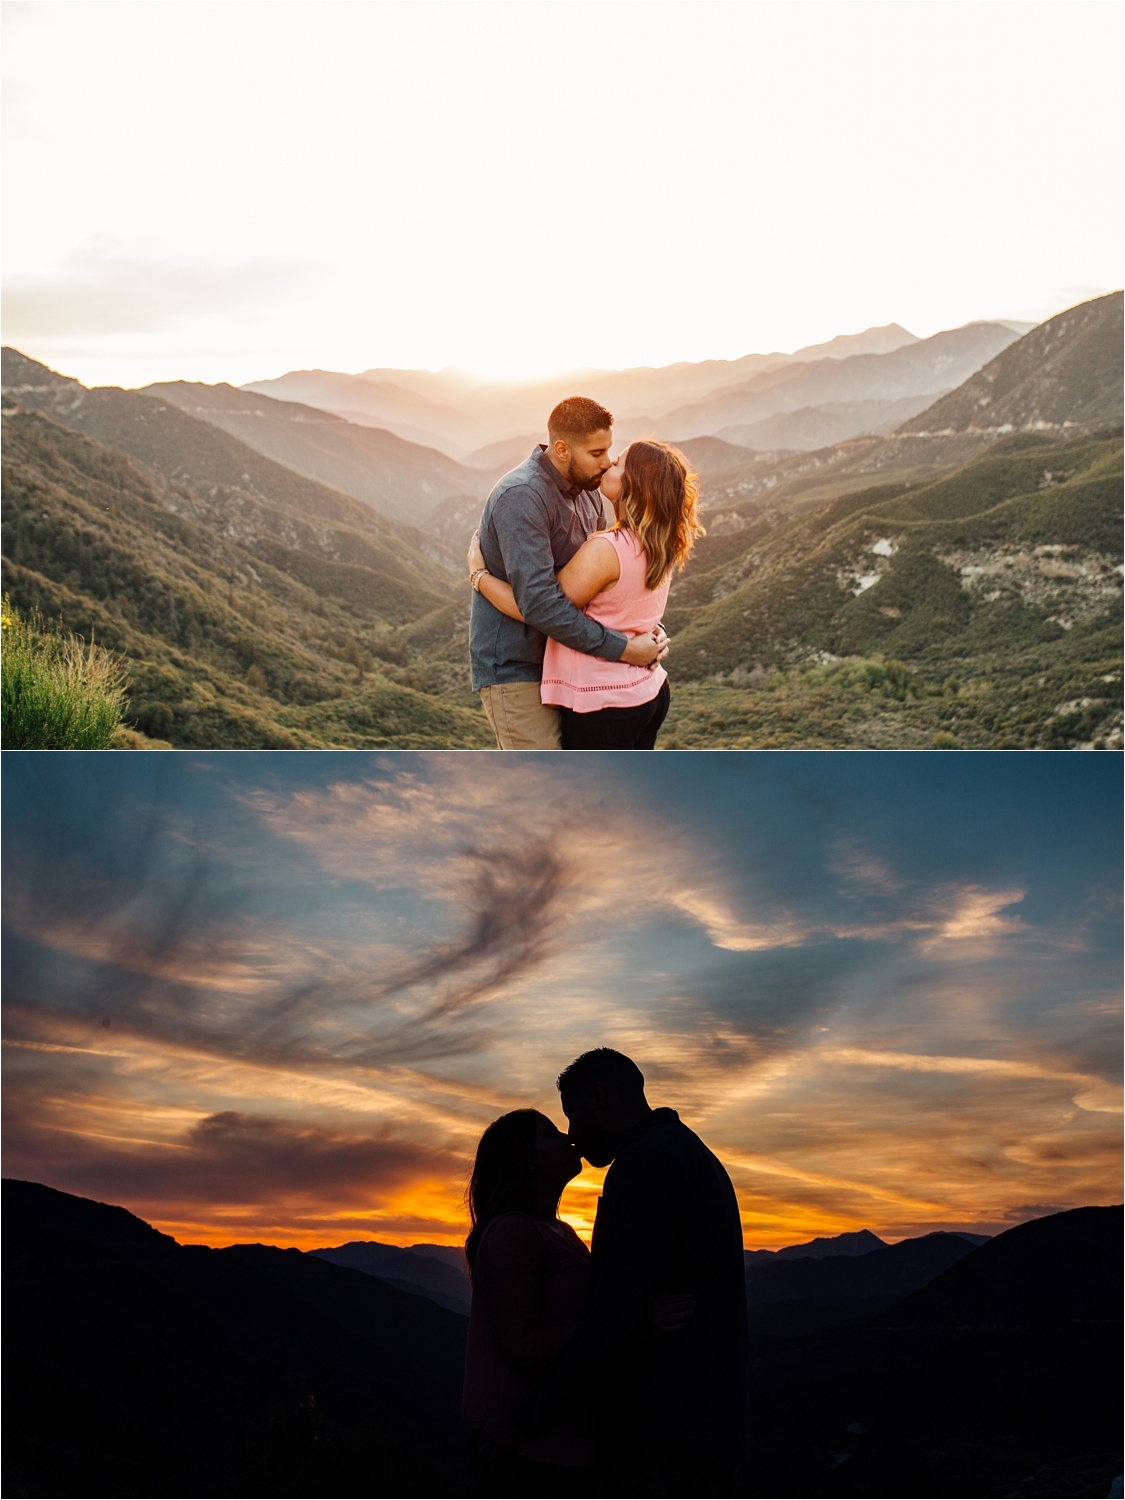 Warm romantic couples photos in the mountains - http://brittneyhannonphotography.com